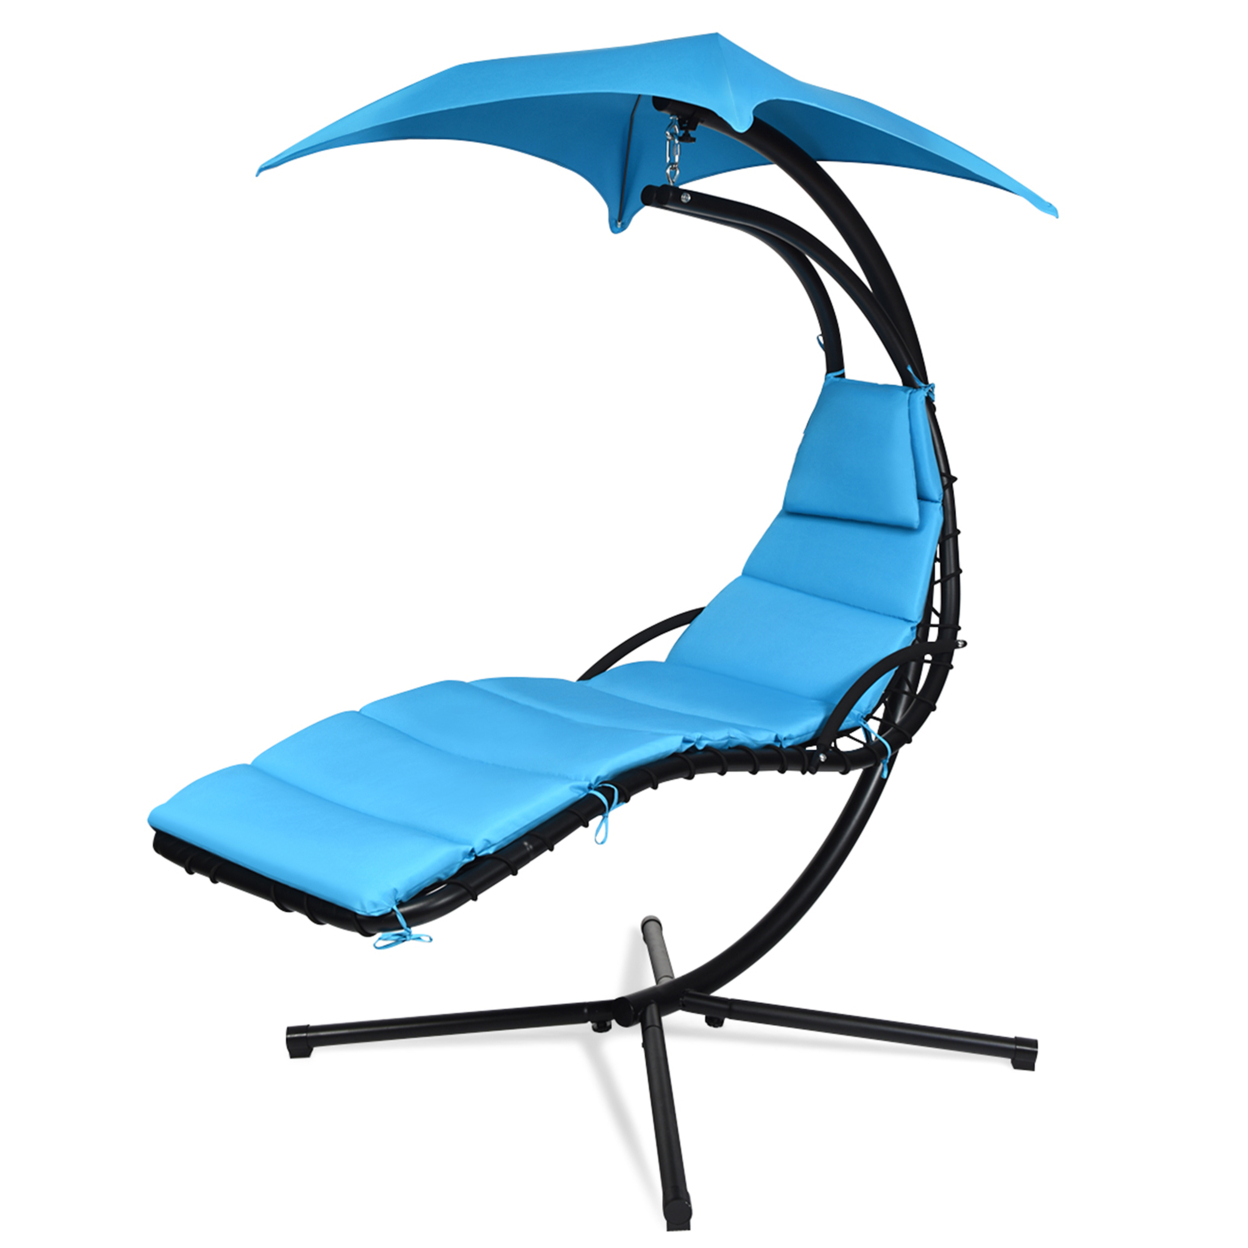 Patio Hammock Swing Chair Hanging Chaise W/ Cushion Pillow Canopy Blue